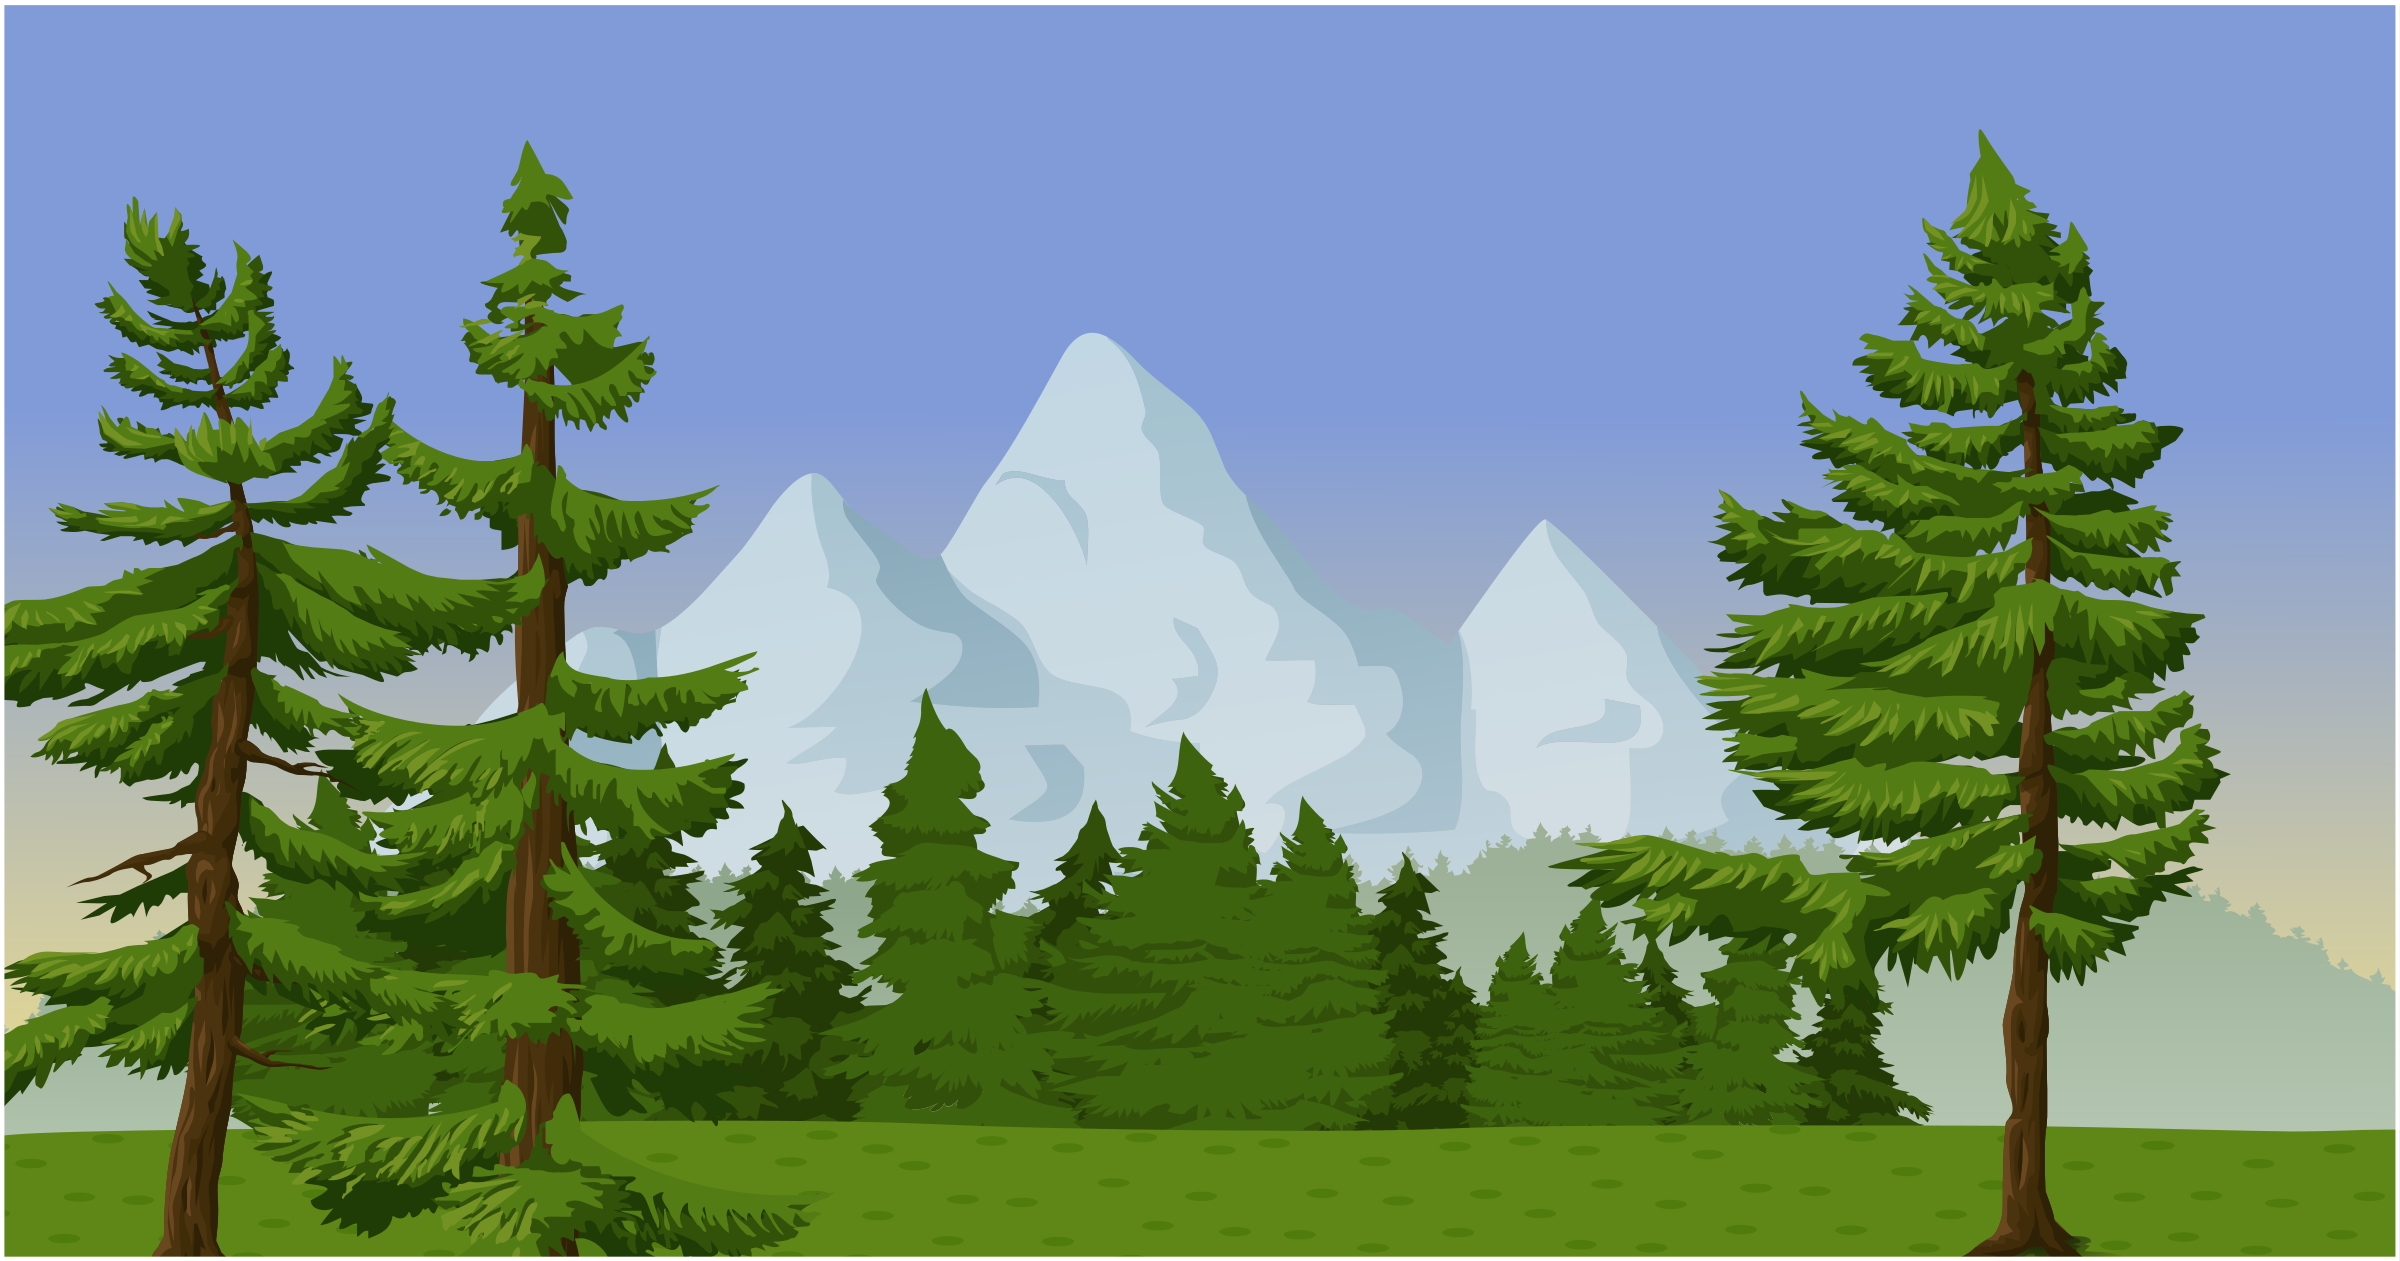 Clipart - Mountain scene with pine trees